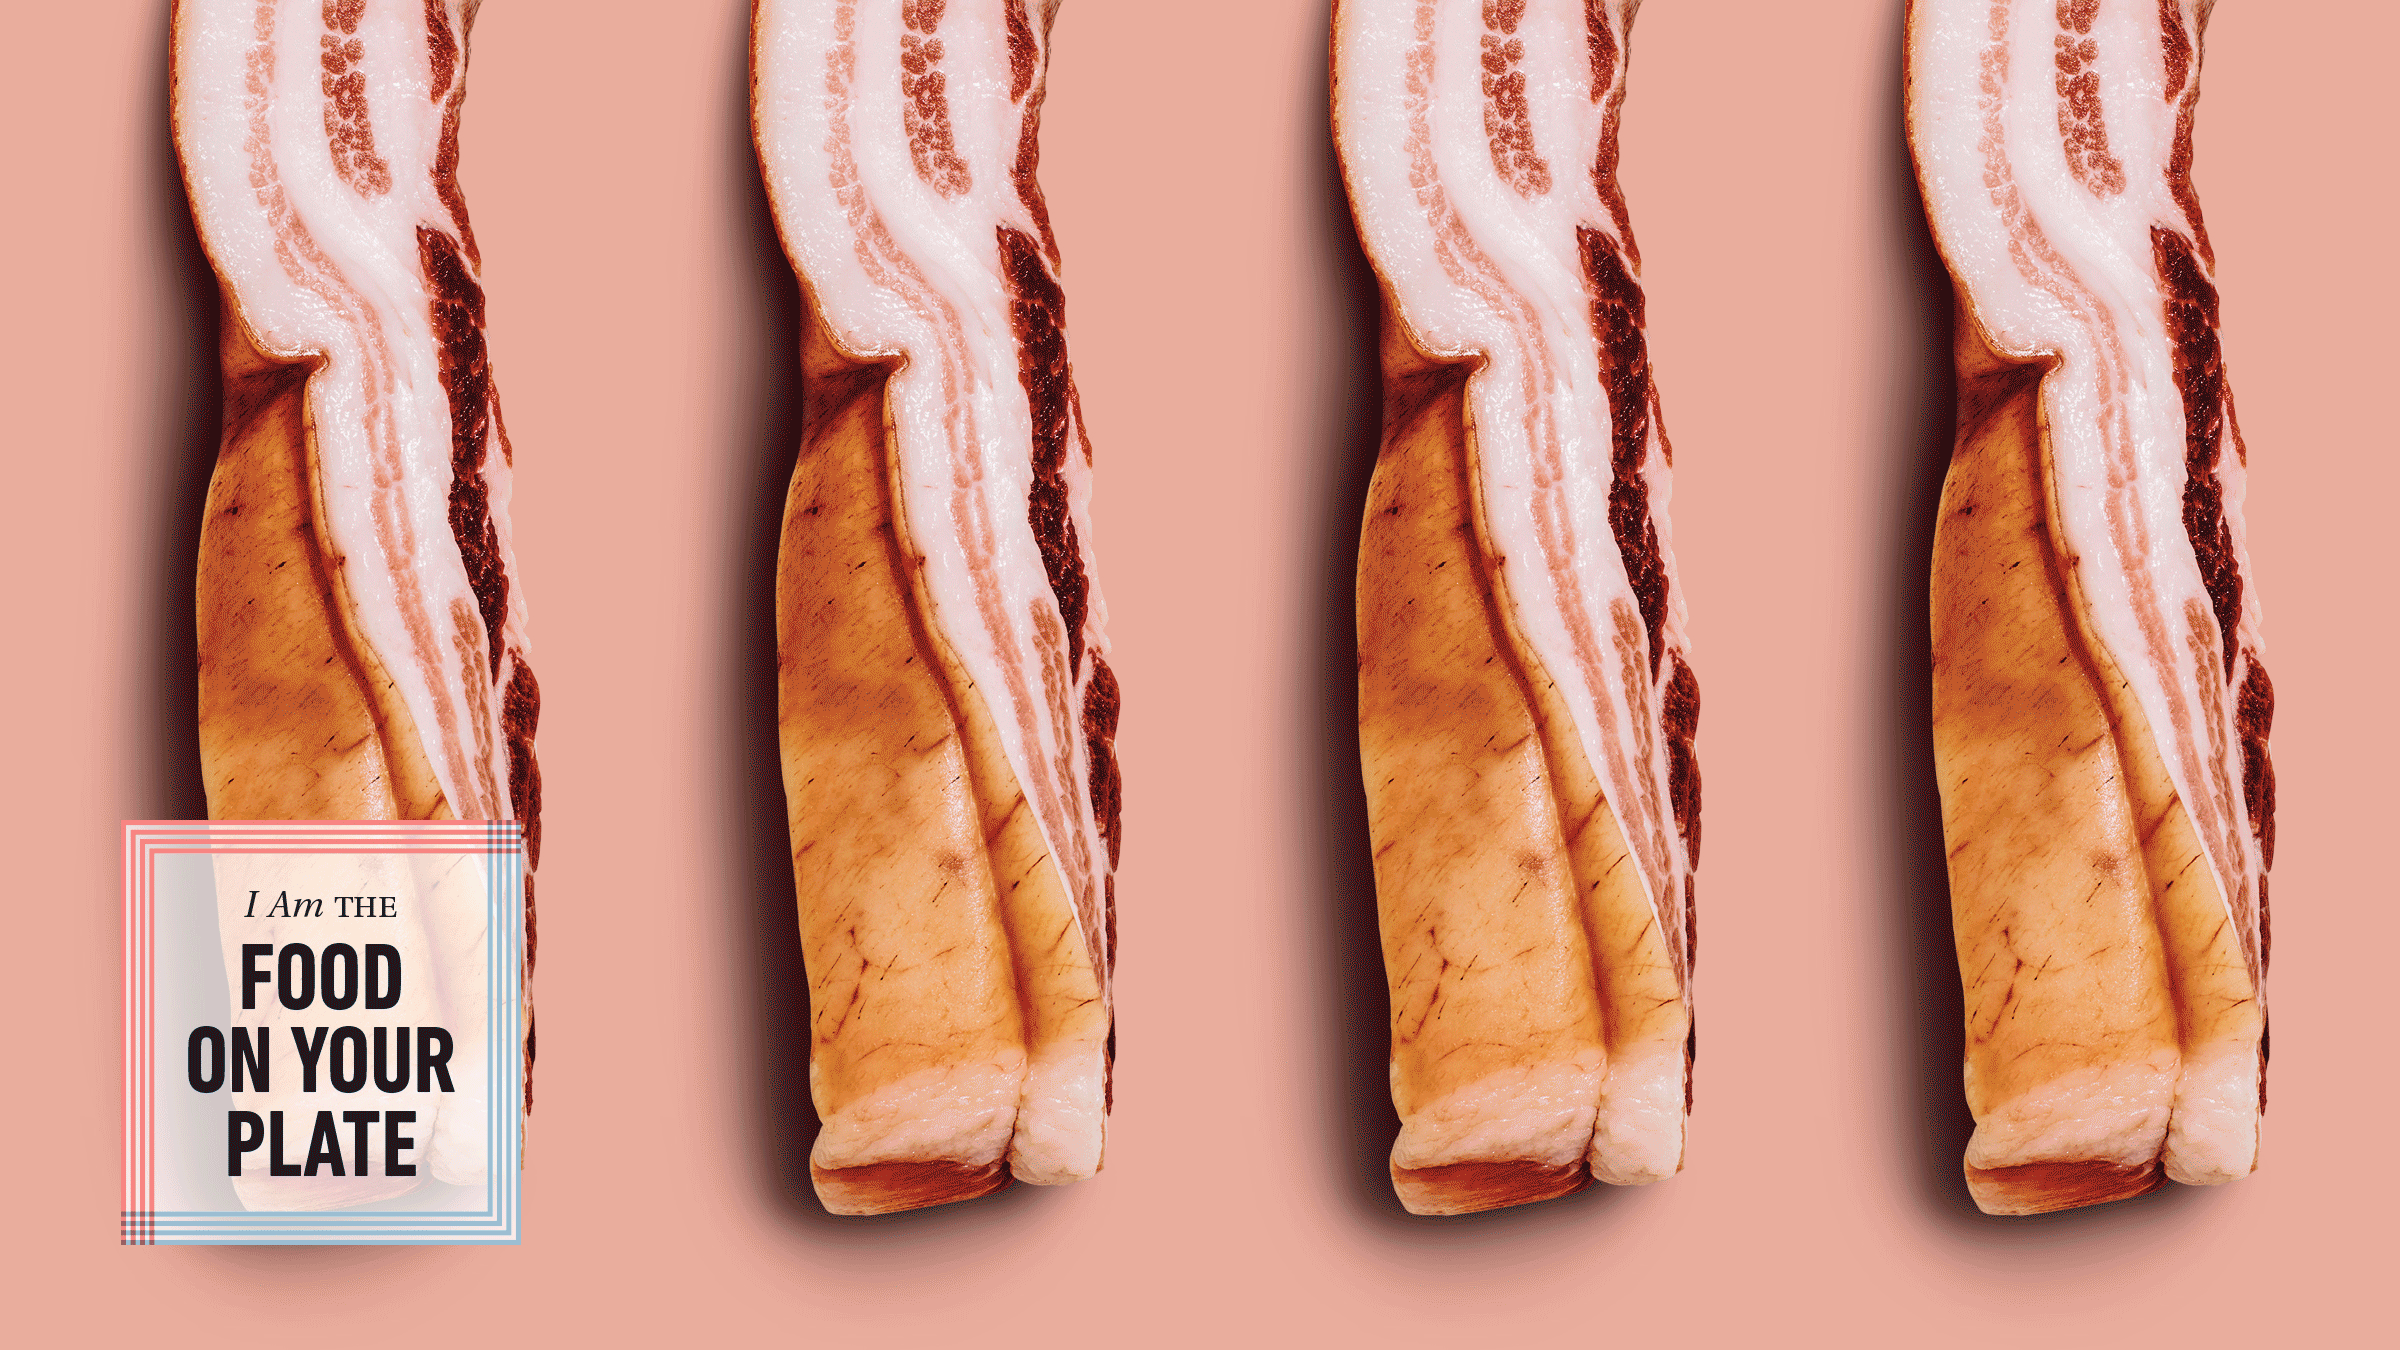 strips of bacon on red-pink background